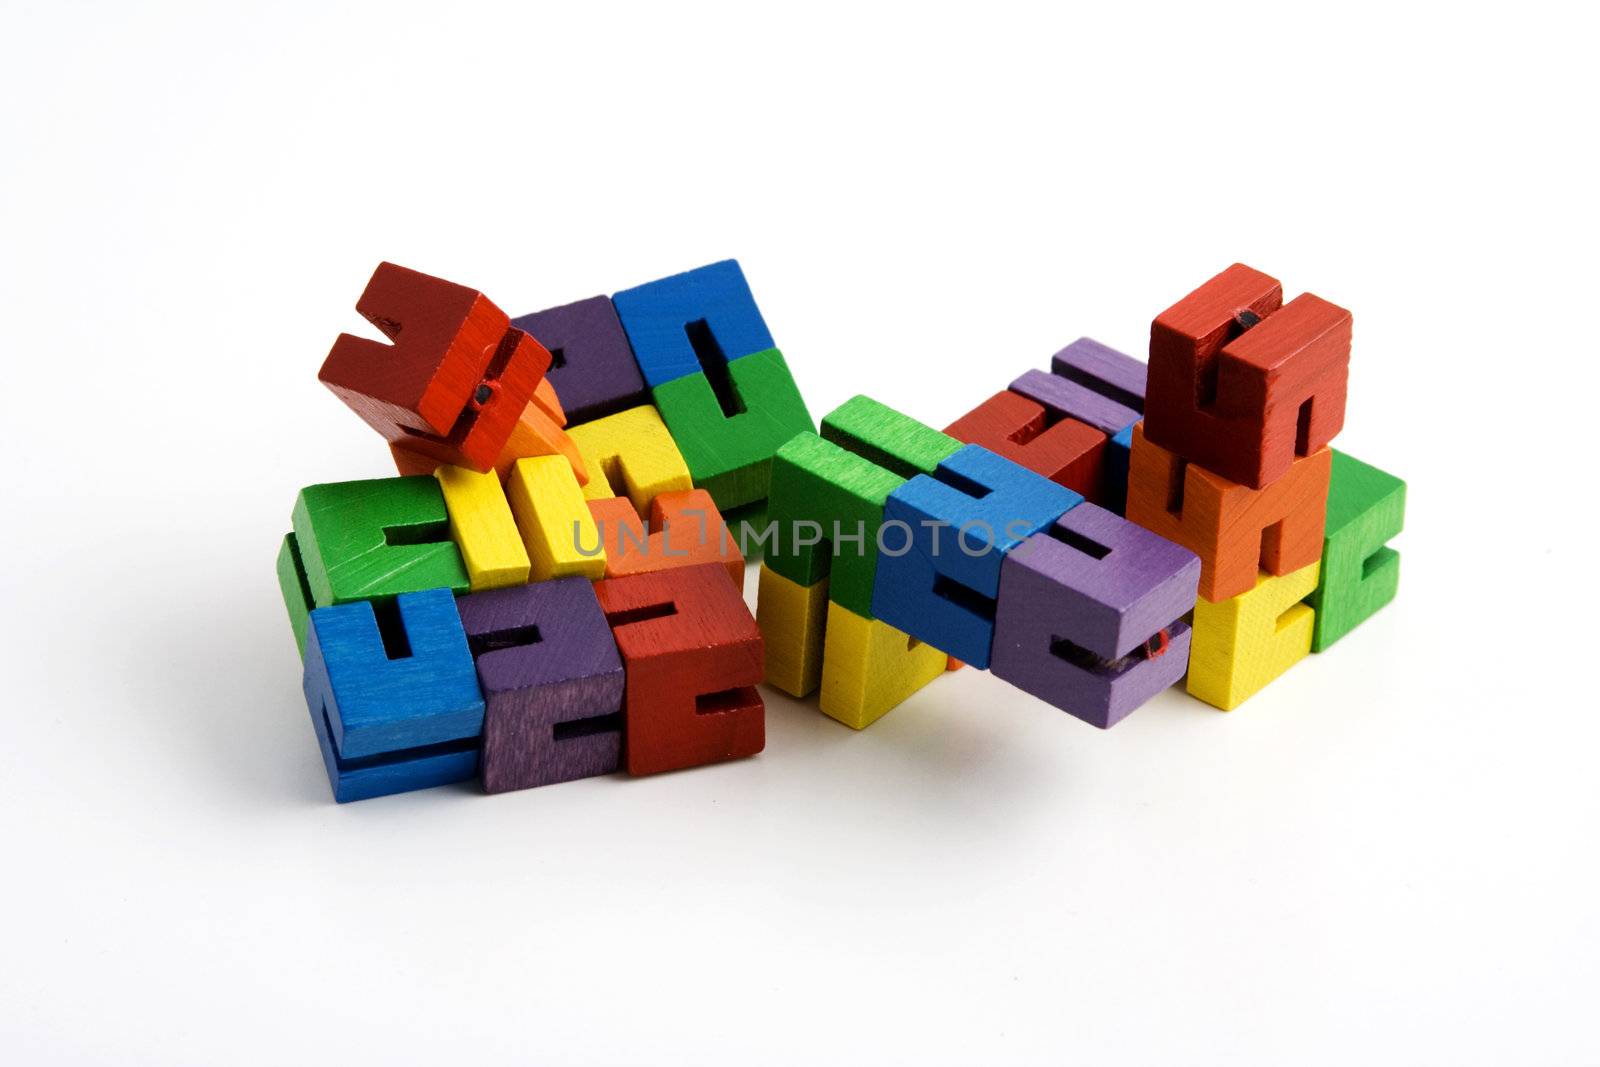 wooden blocks on string to help children focus their attention while studying in class teachers give to students that have learning disorders like adhd